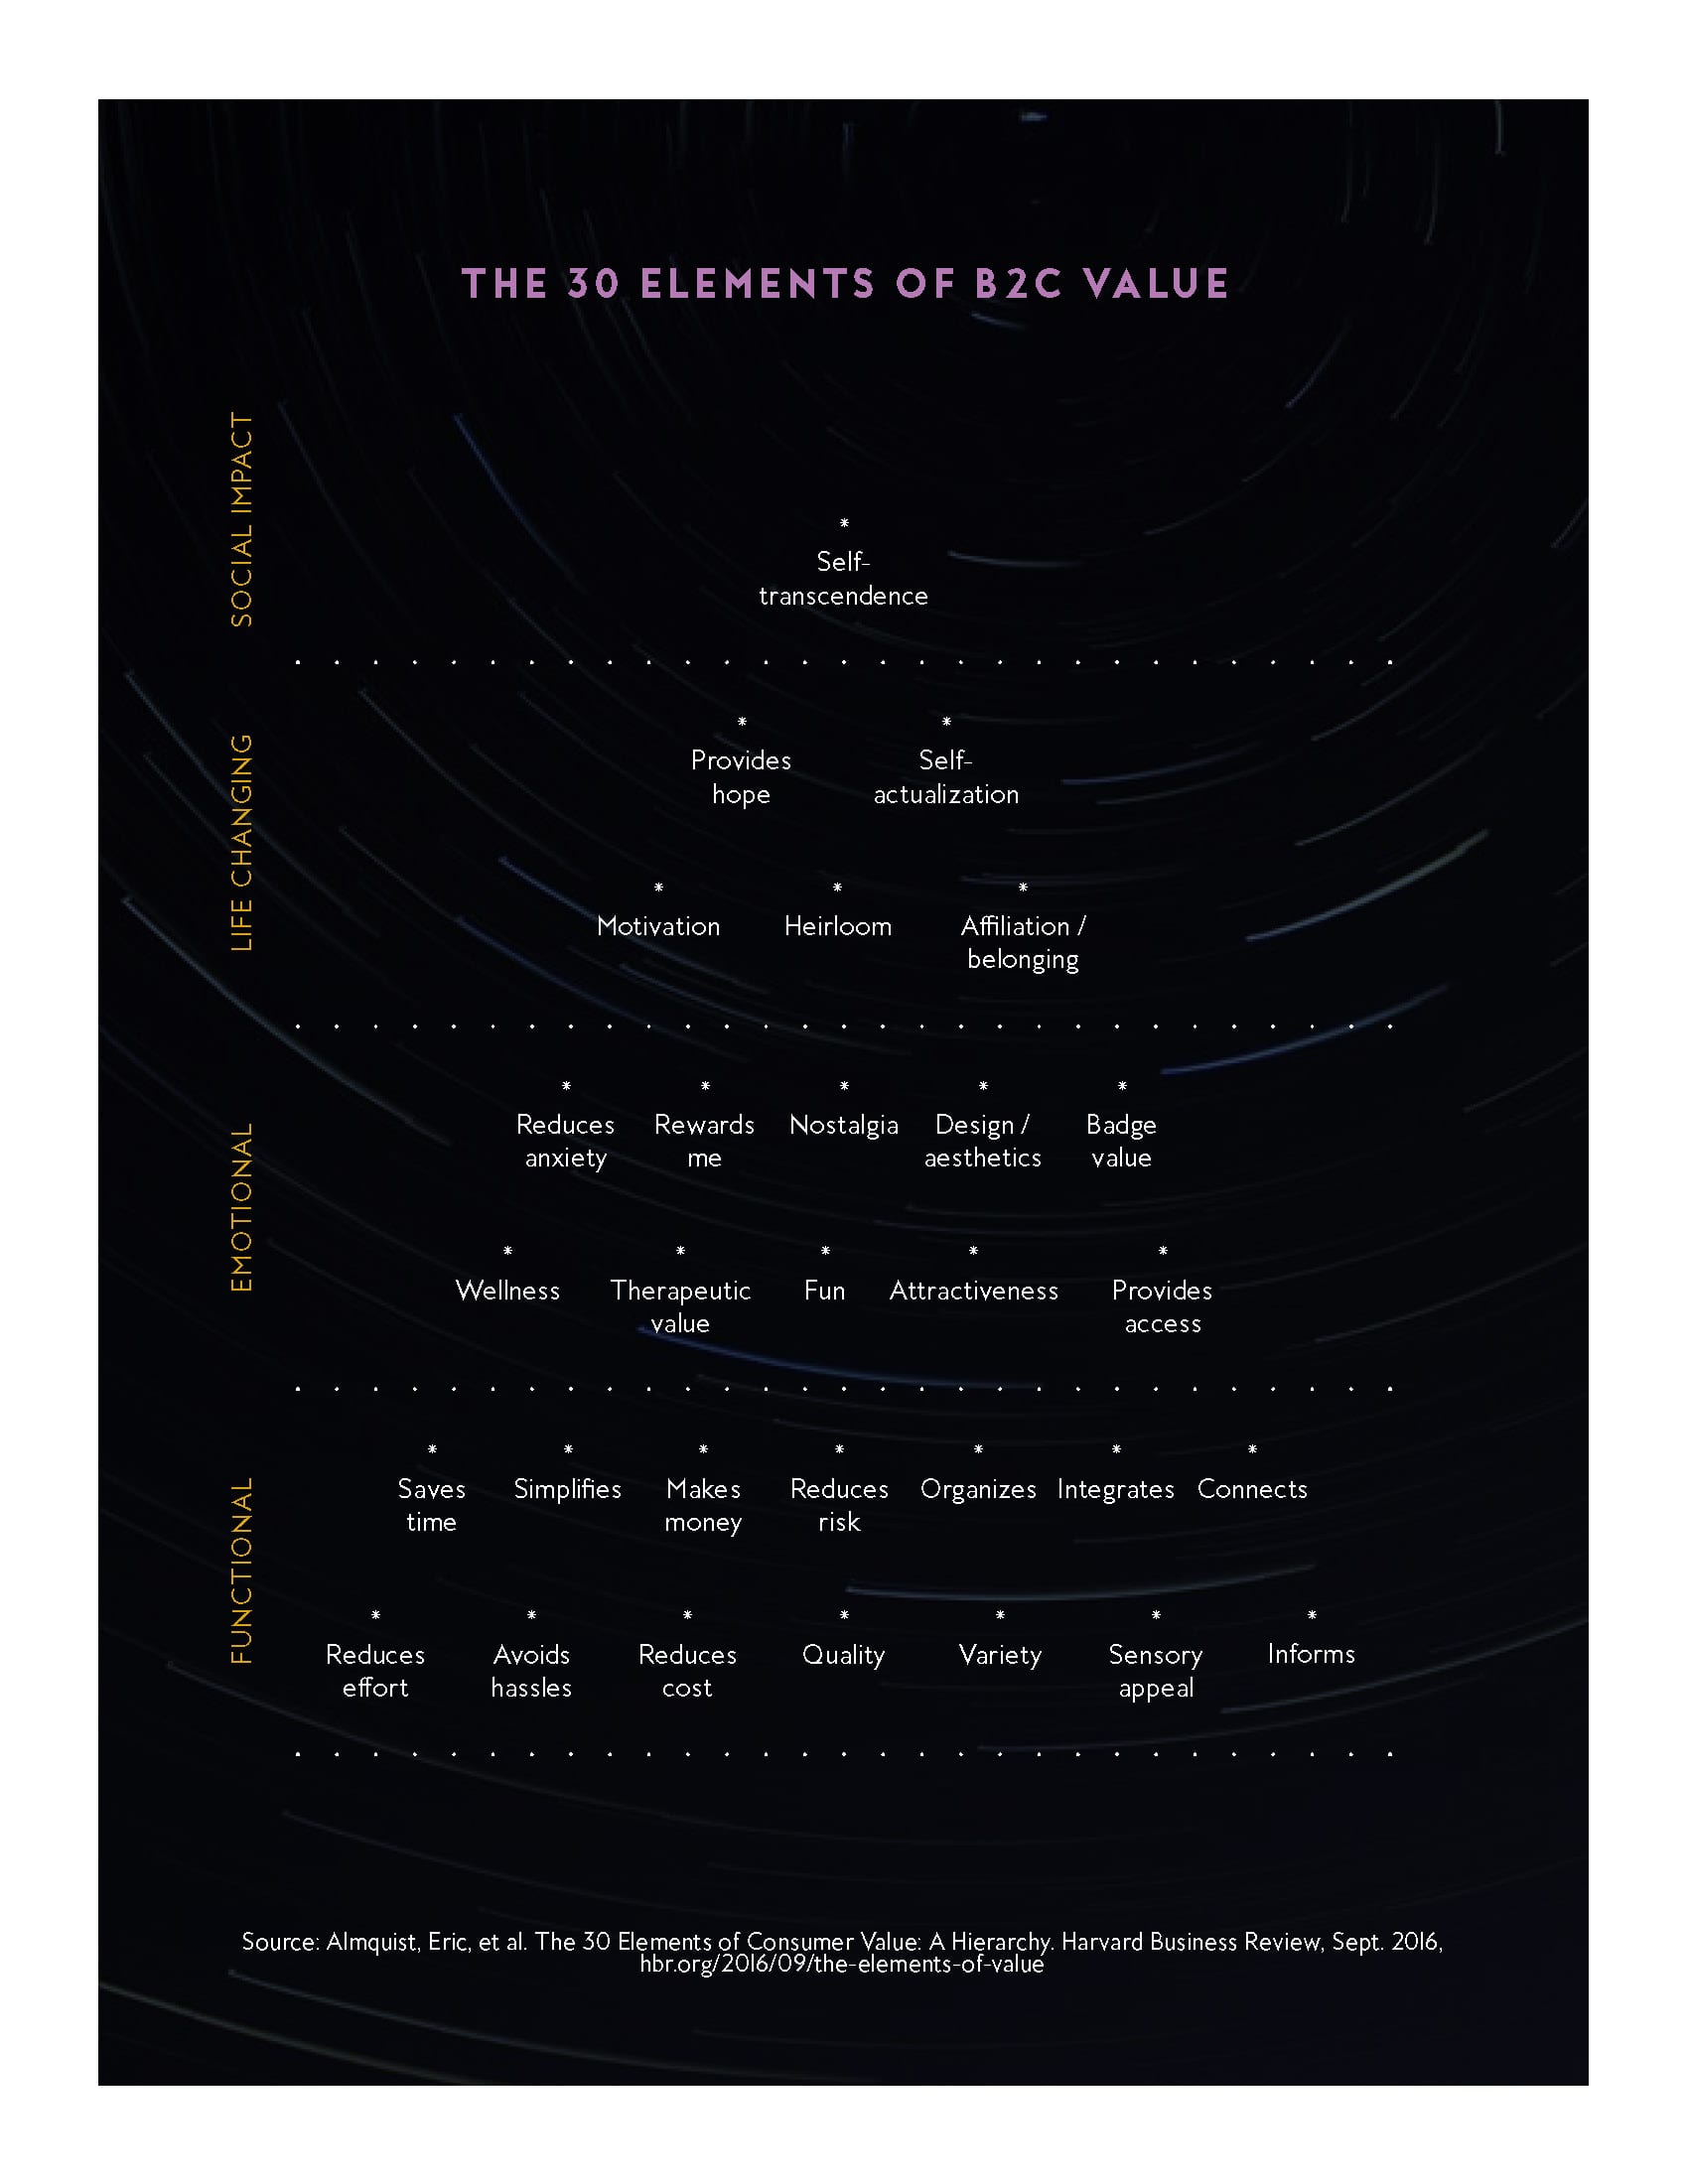 The 30 Elements of B2C Value